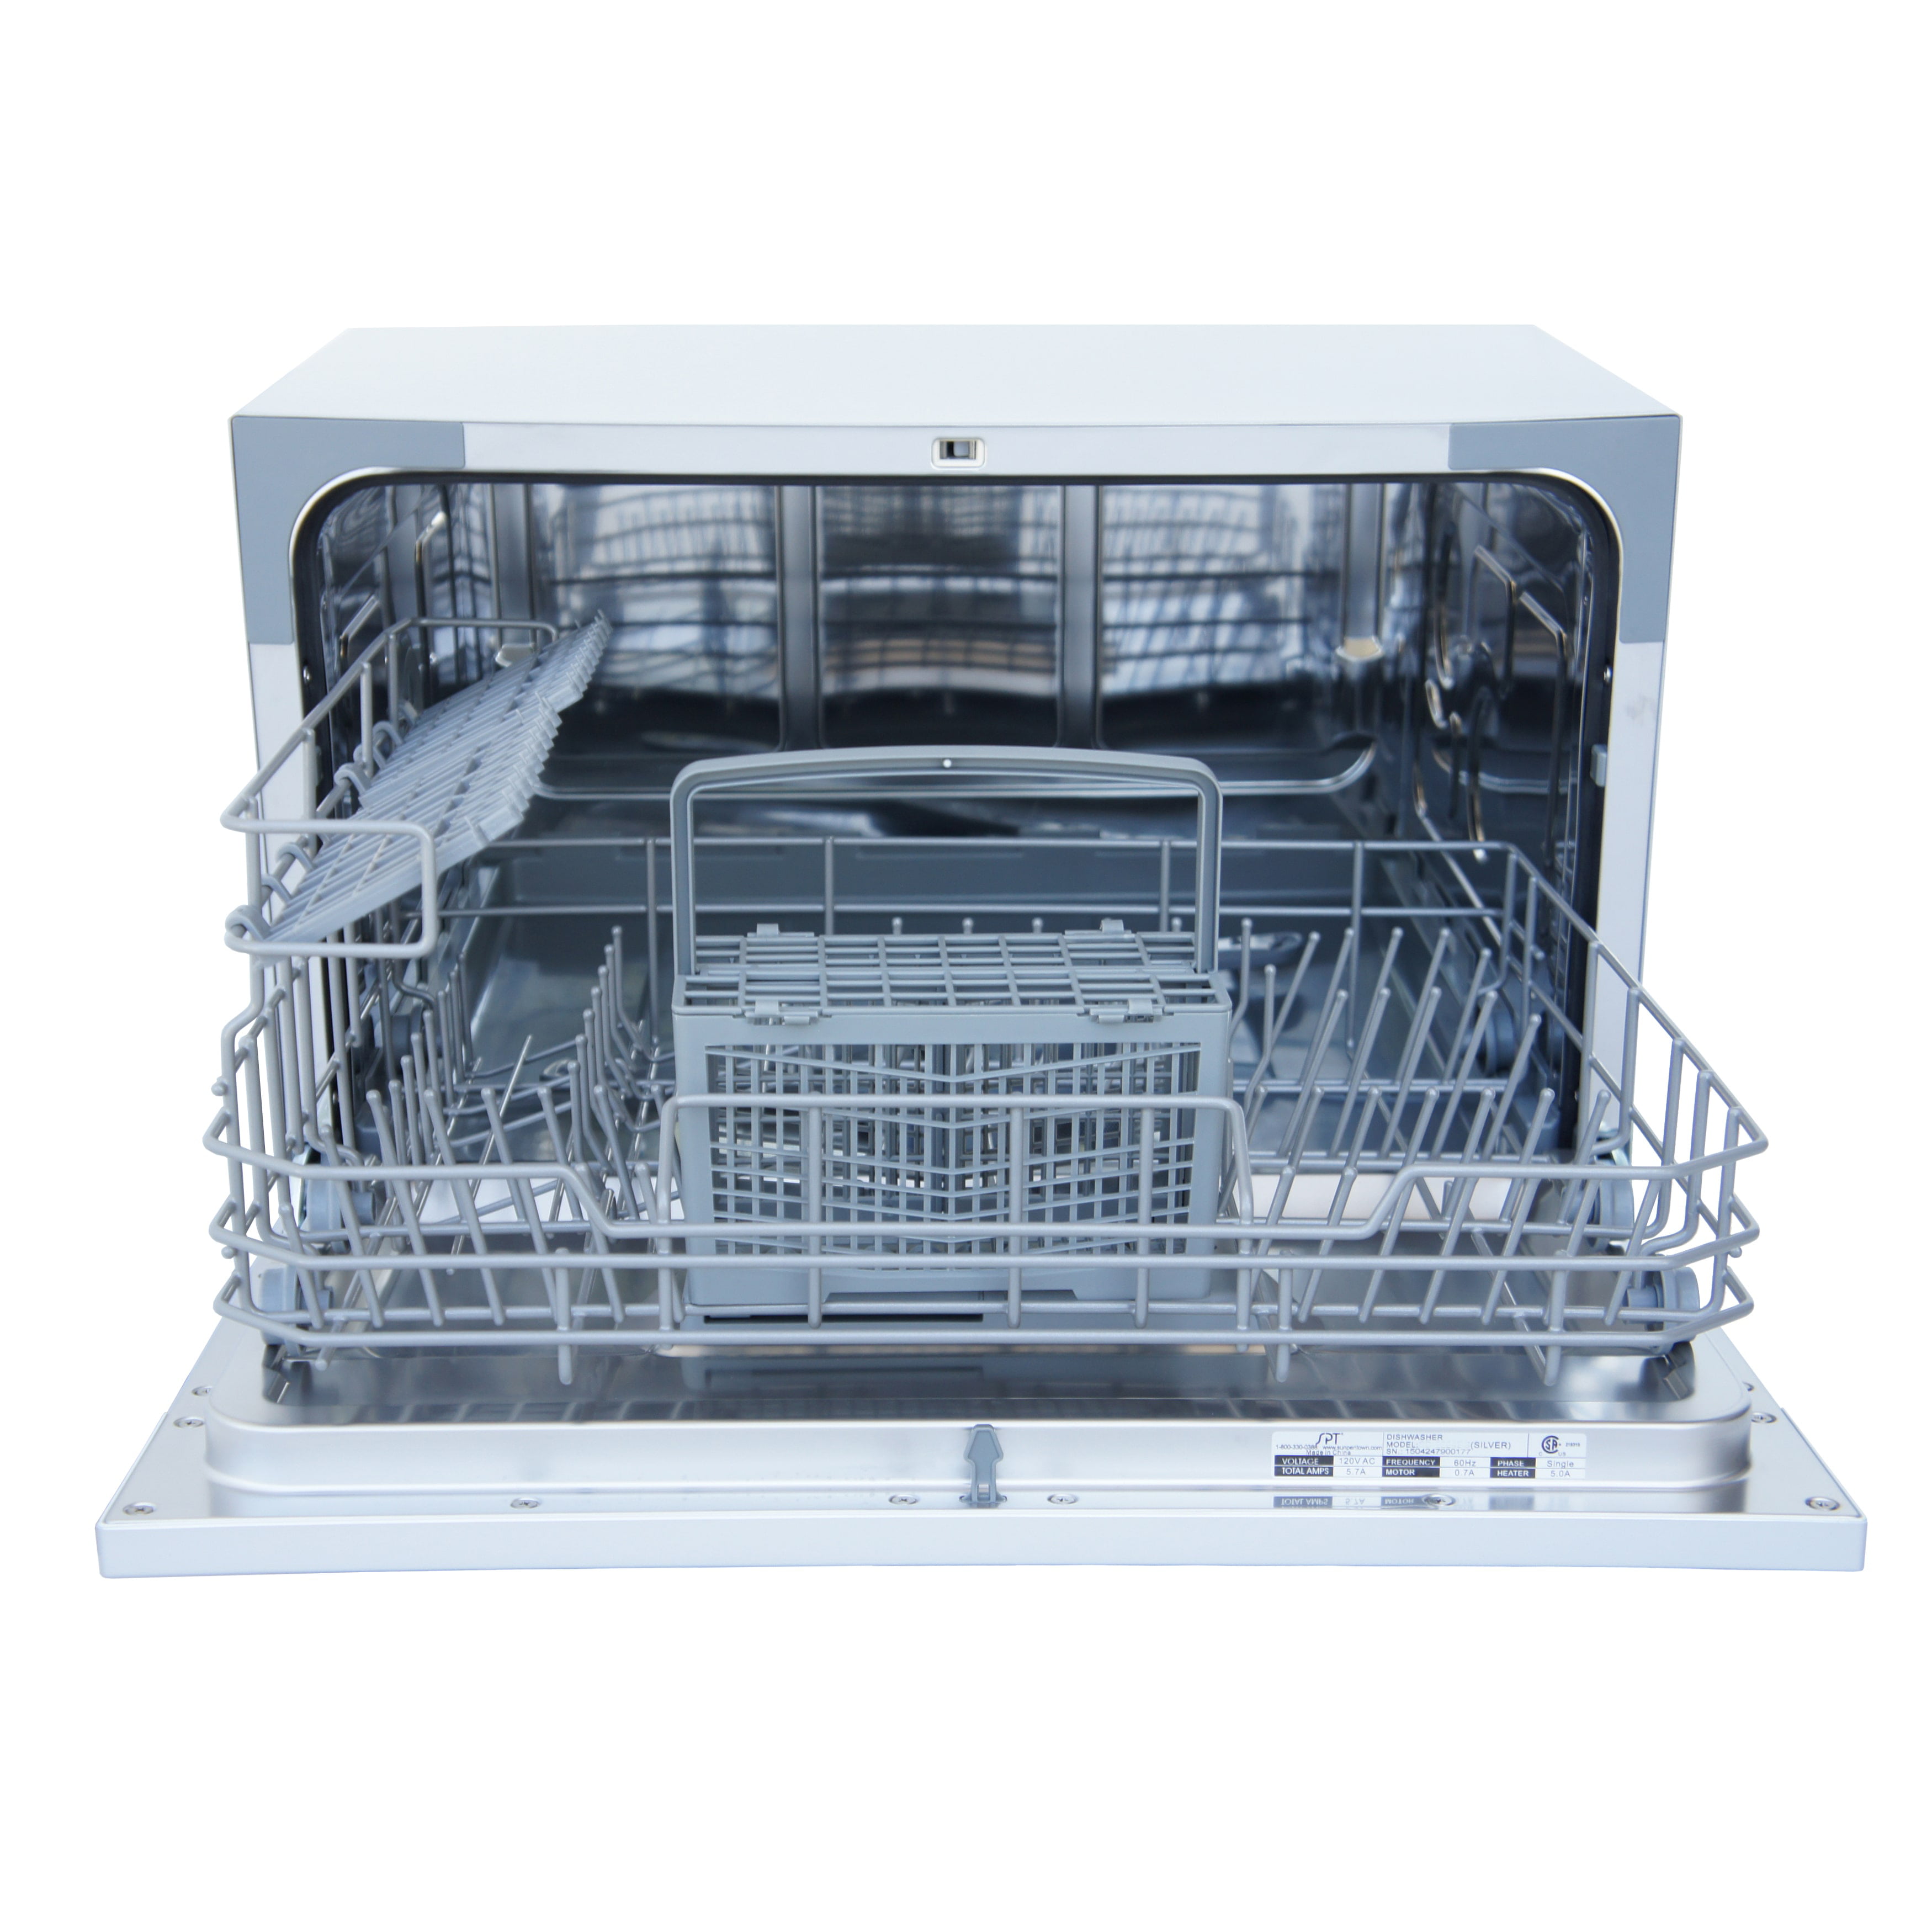 SD-2224DS Countertop Dishwasher with Delay Start & LED – Silver - 1